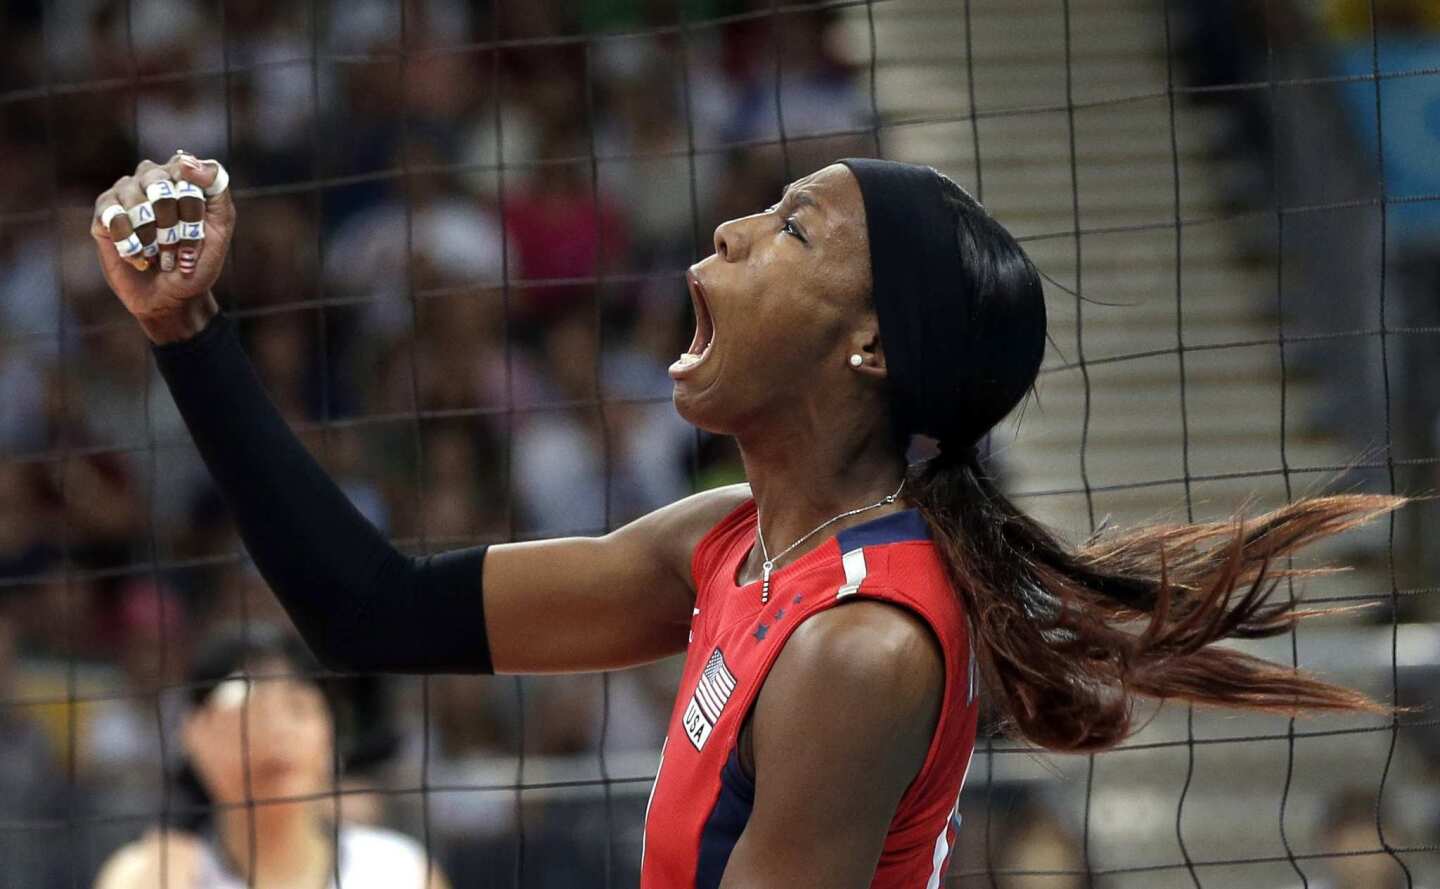 Team USA's Destinee Hooker reacts after scoring a point against South Korea during a women's volleyball semifinal match. The U.S. defeated the Koreans in straight sets to earn a spot in the gold-medal match.